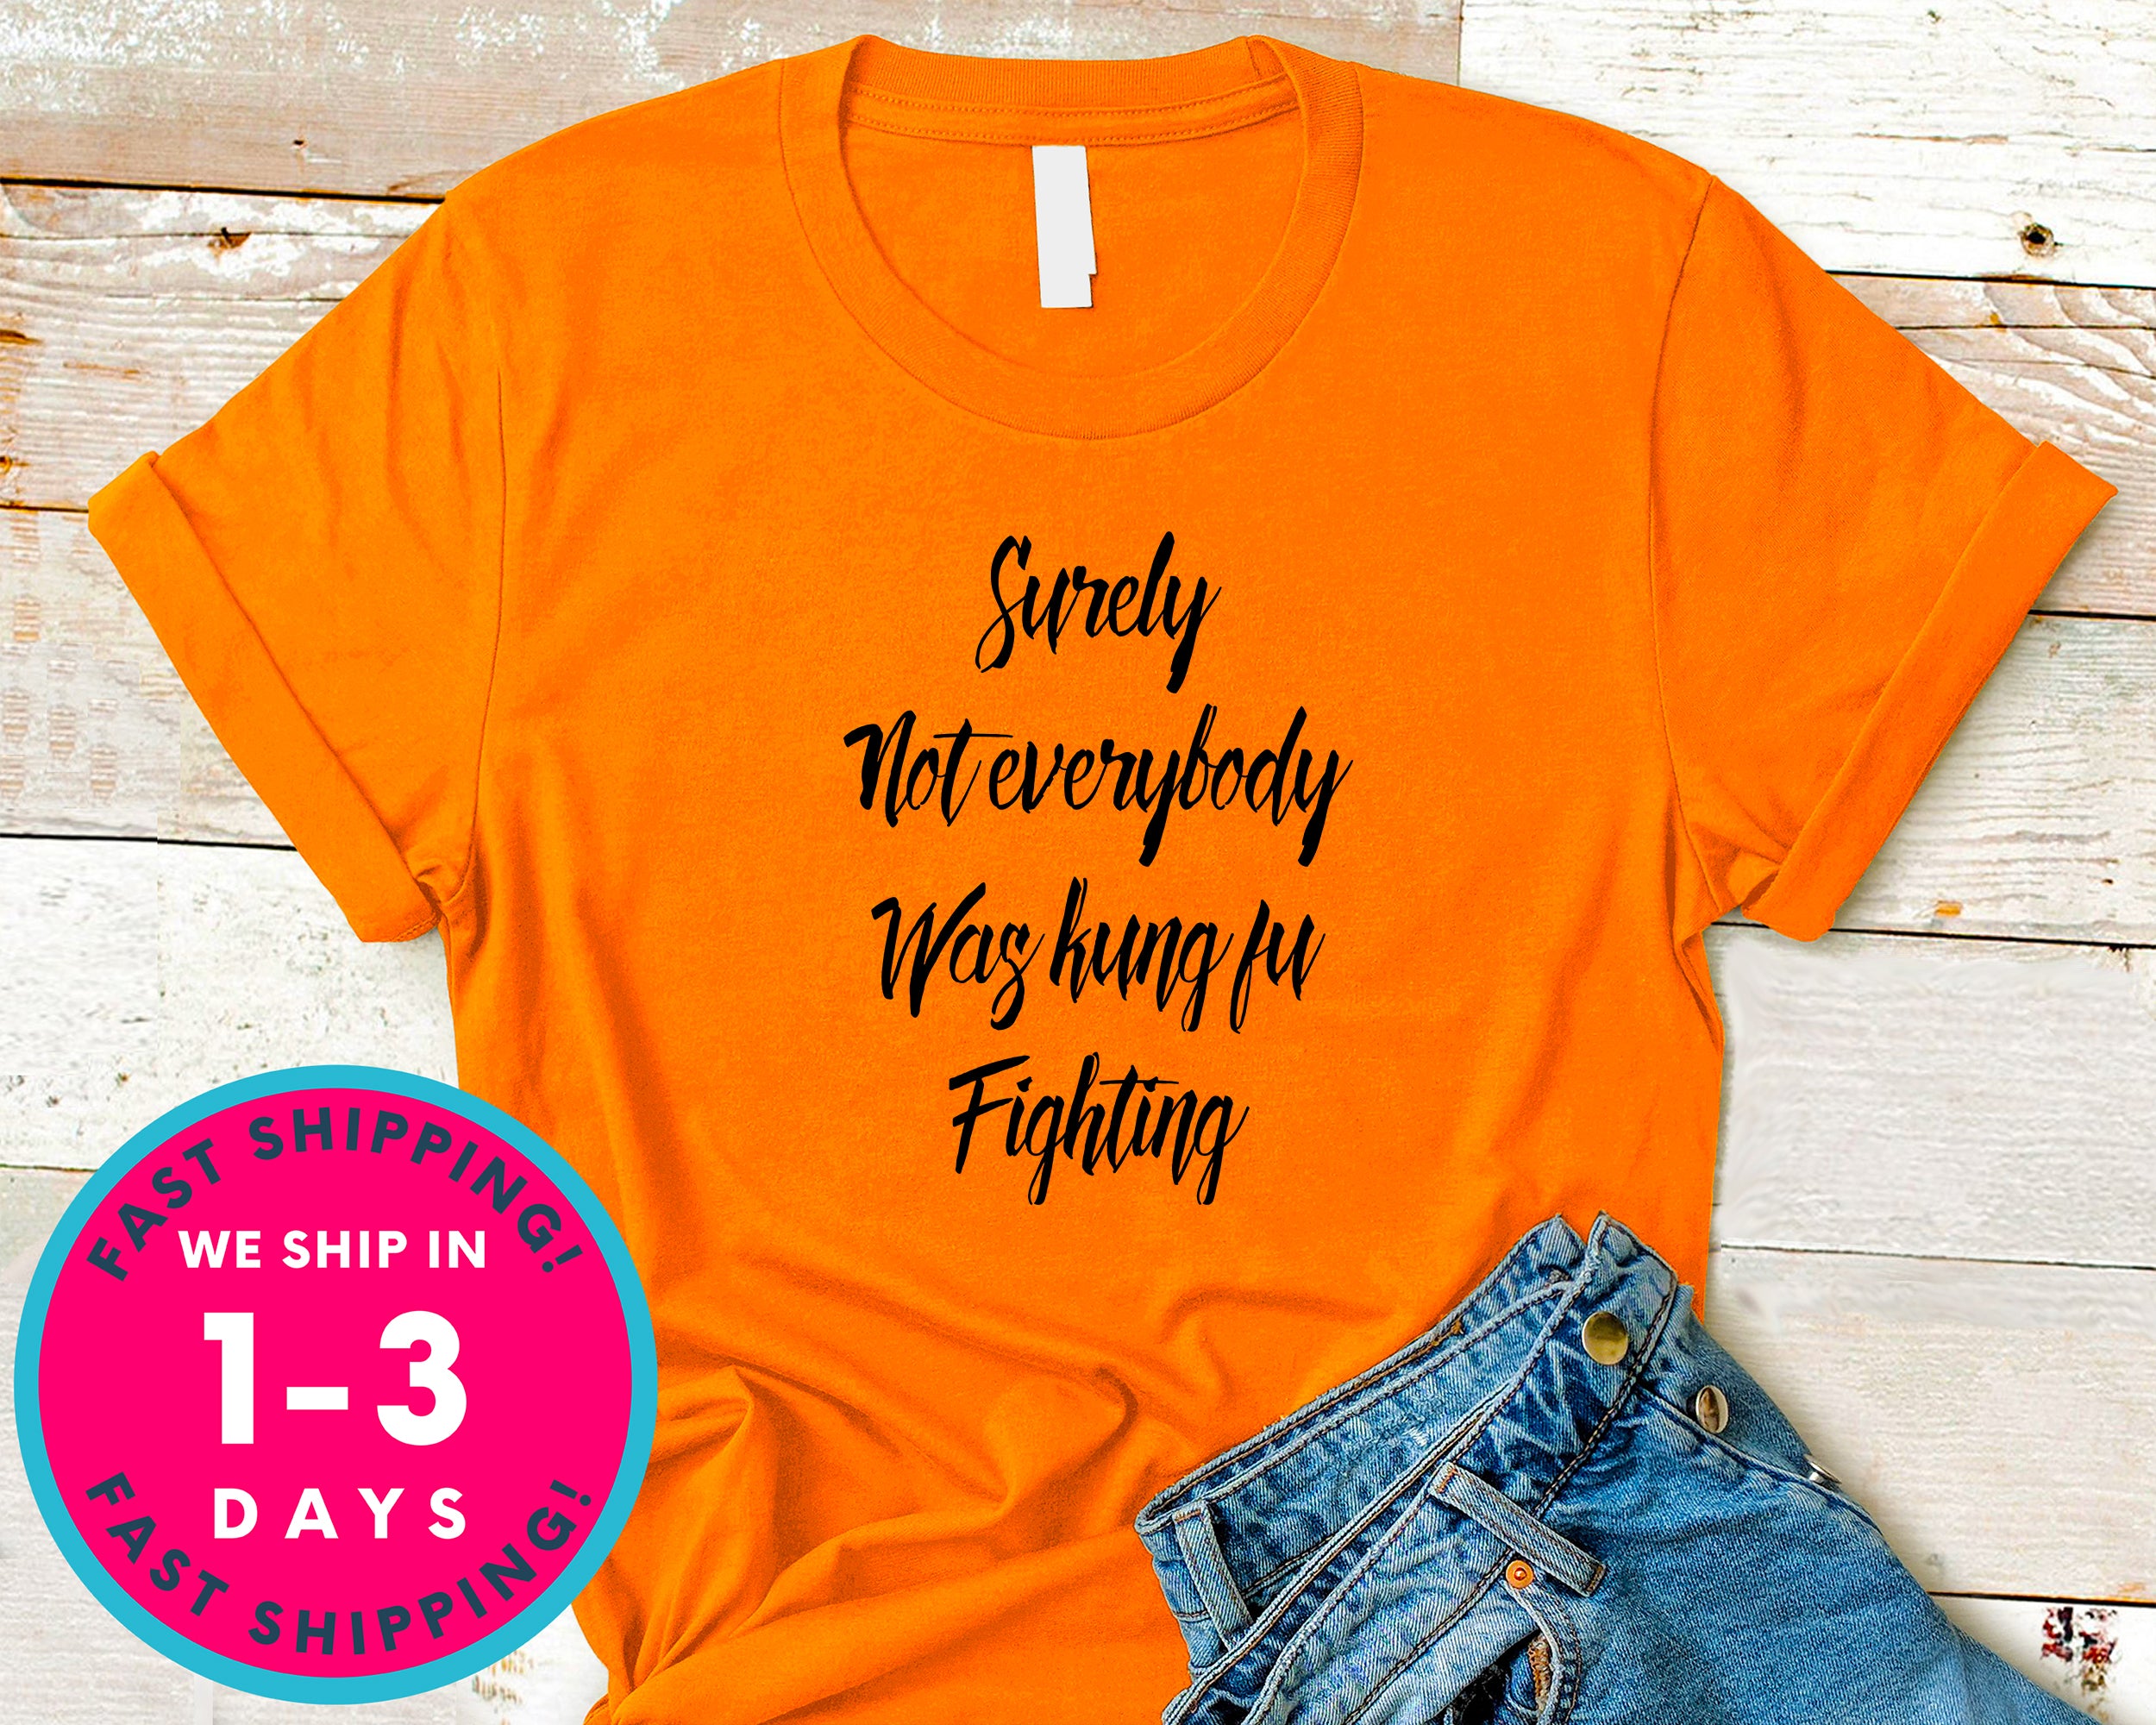 Surely Not Everybody Was Kung Fu Fighting T-Shirt - Funny Humor Shirt